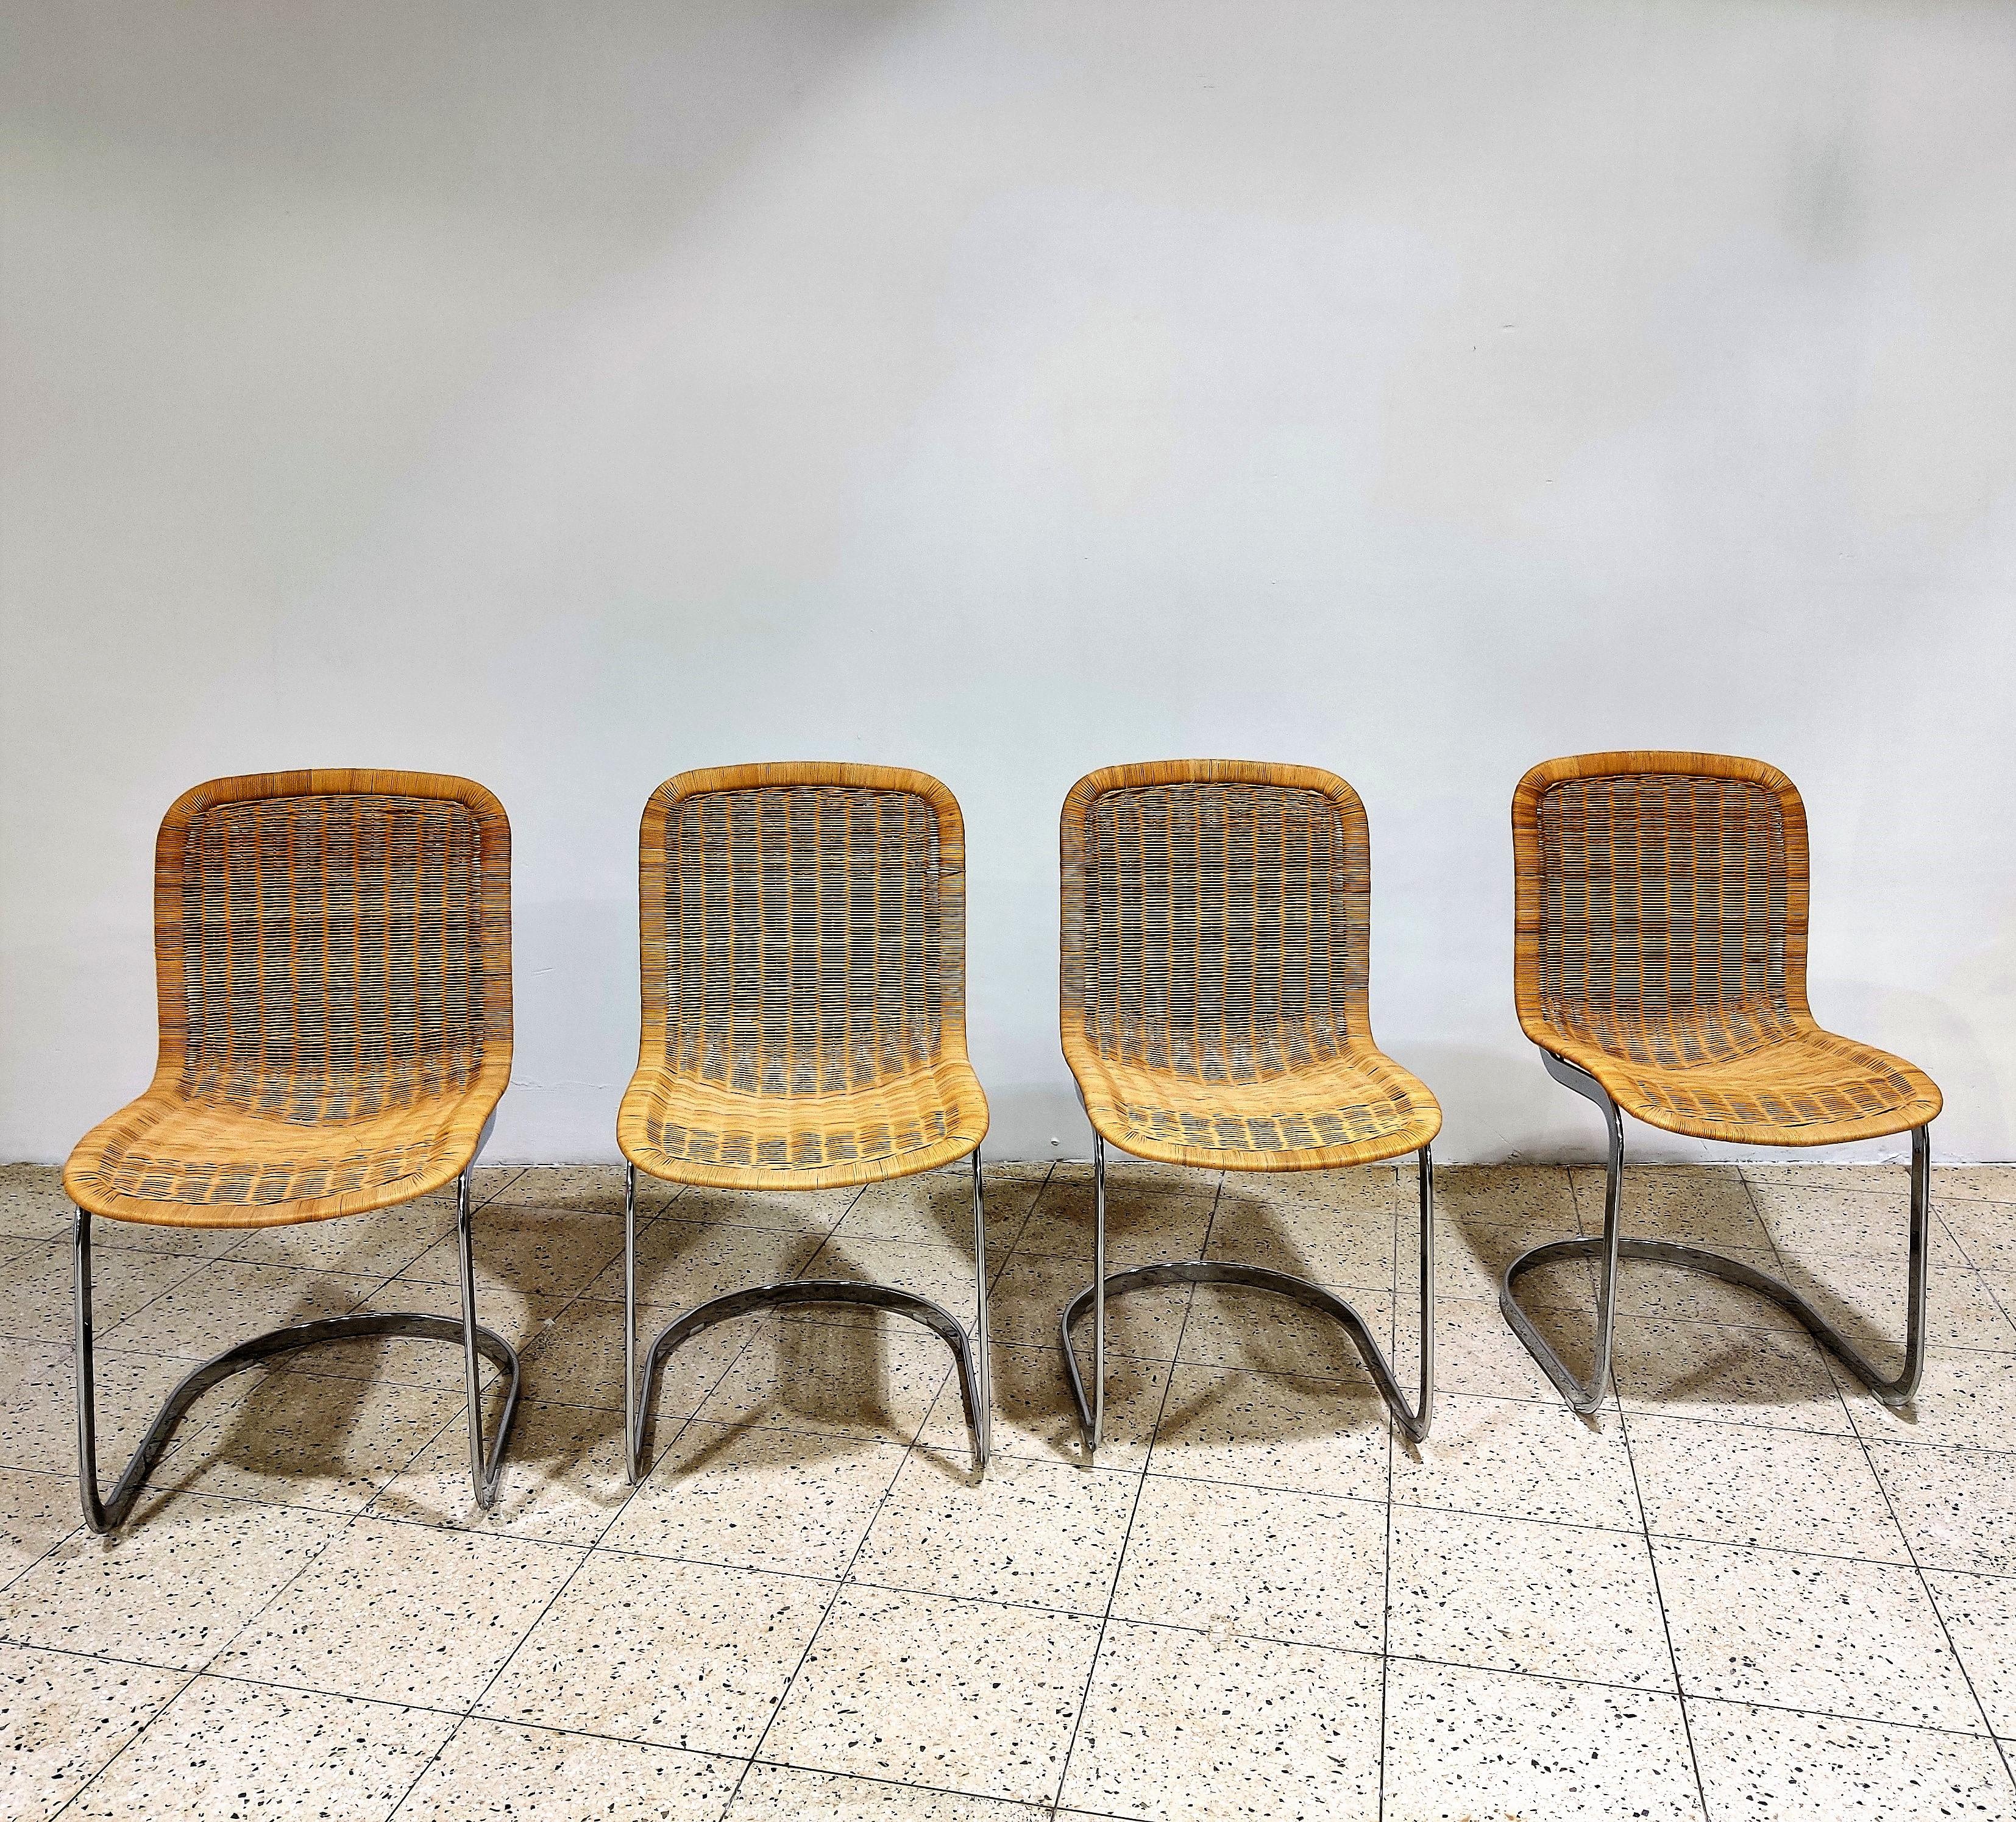 Set of 4 rare dining chairs in rattan and chrome by Cidue.

The same chairs in leather are known to be designed by Willy Rizzo.

Good condition, polished chrome.

Labeled 'Cidue'

The chairs still look up to date in modern day interiors and